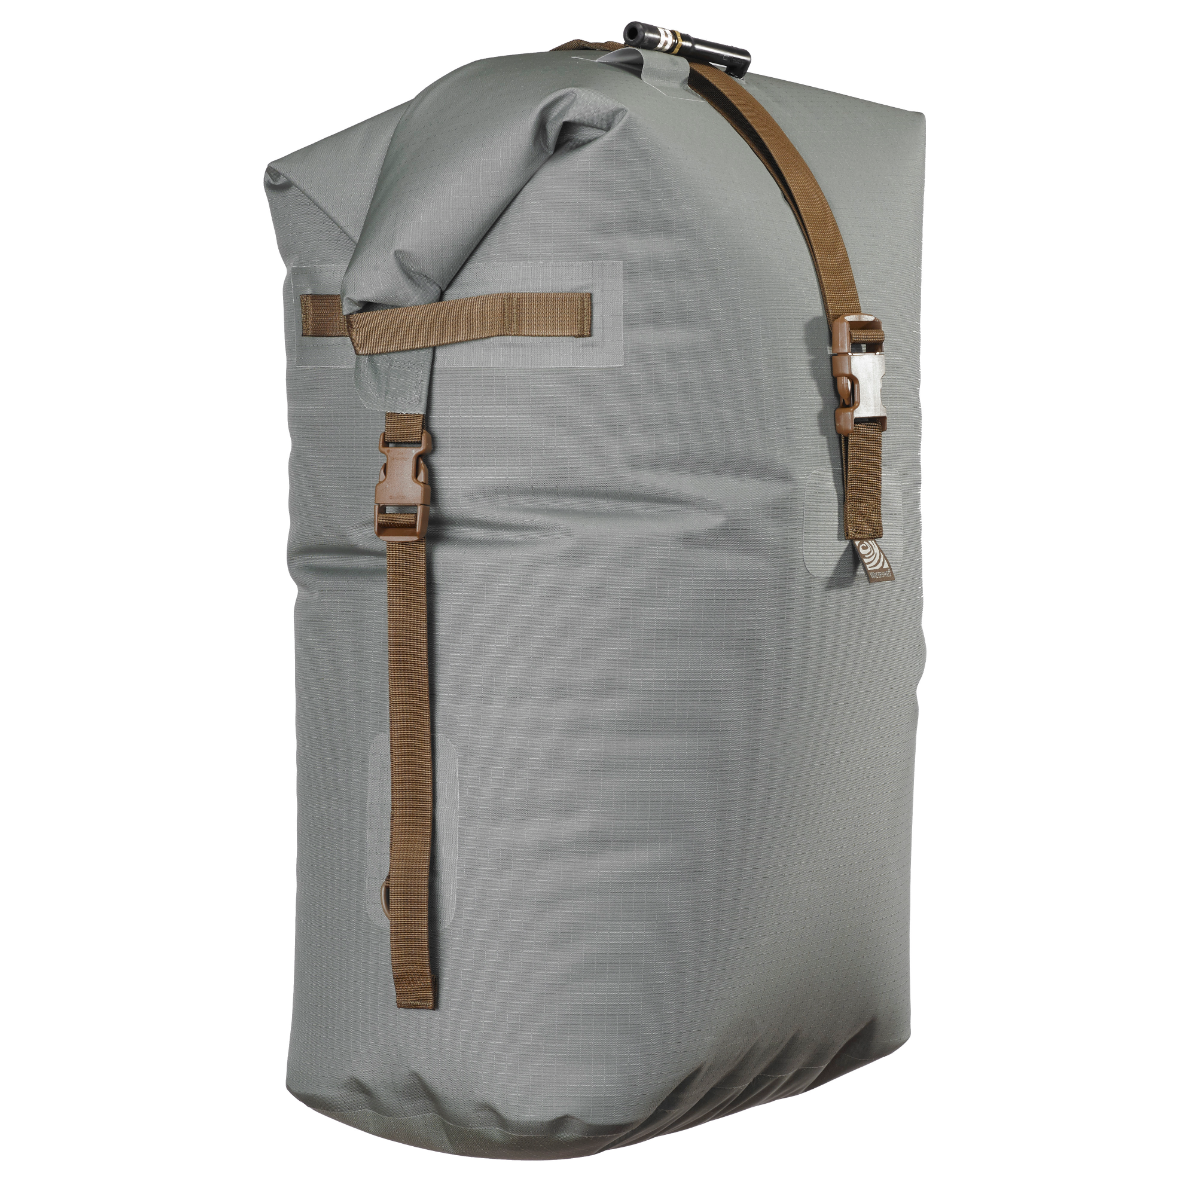 12102-ZD: Backpack Liner, Large, Lightweight Foliage - Watershed Drybags